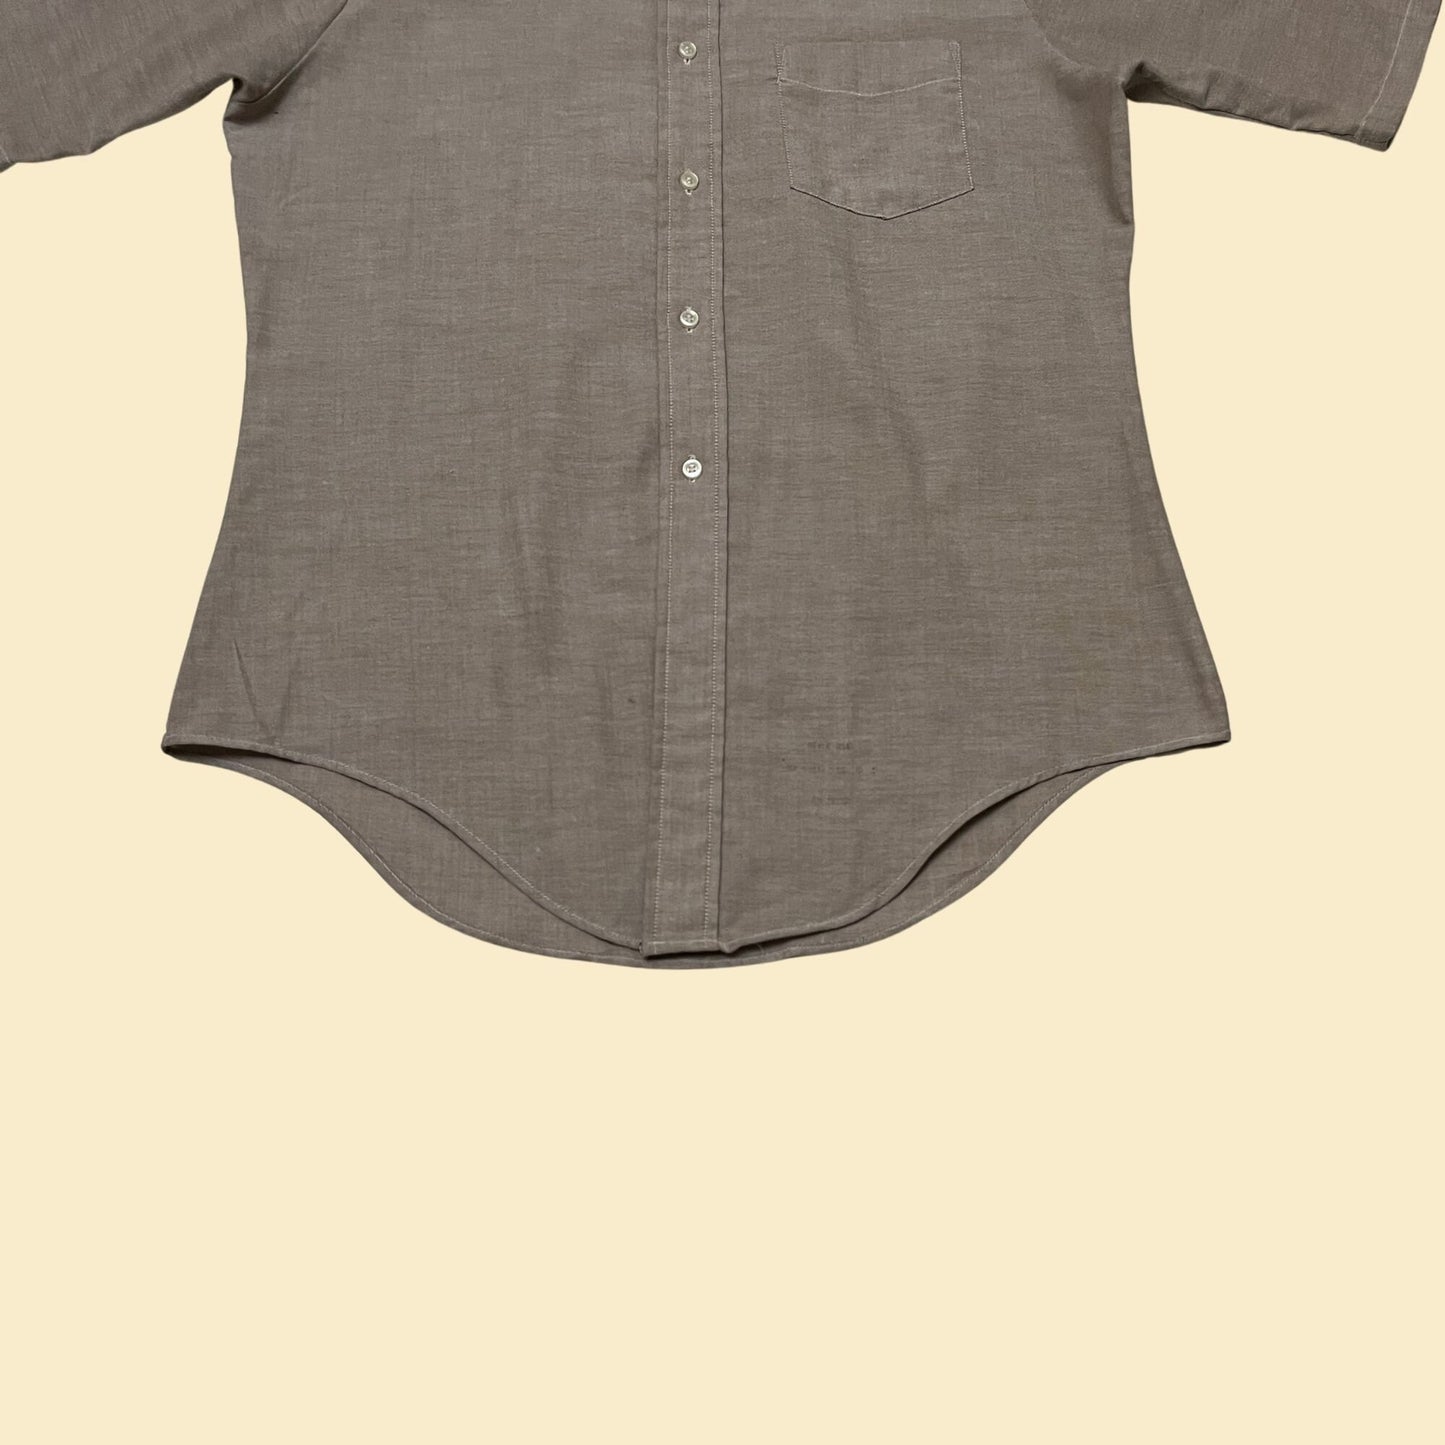 70s men's casual shirt by Never Pressed, Sanforized, vintage short sleeve workwear button down in light brown